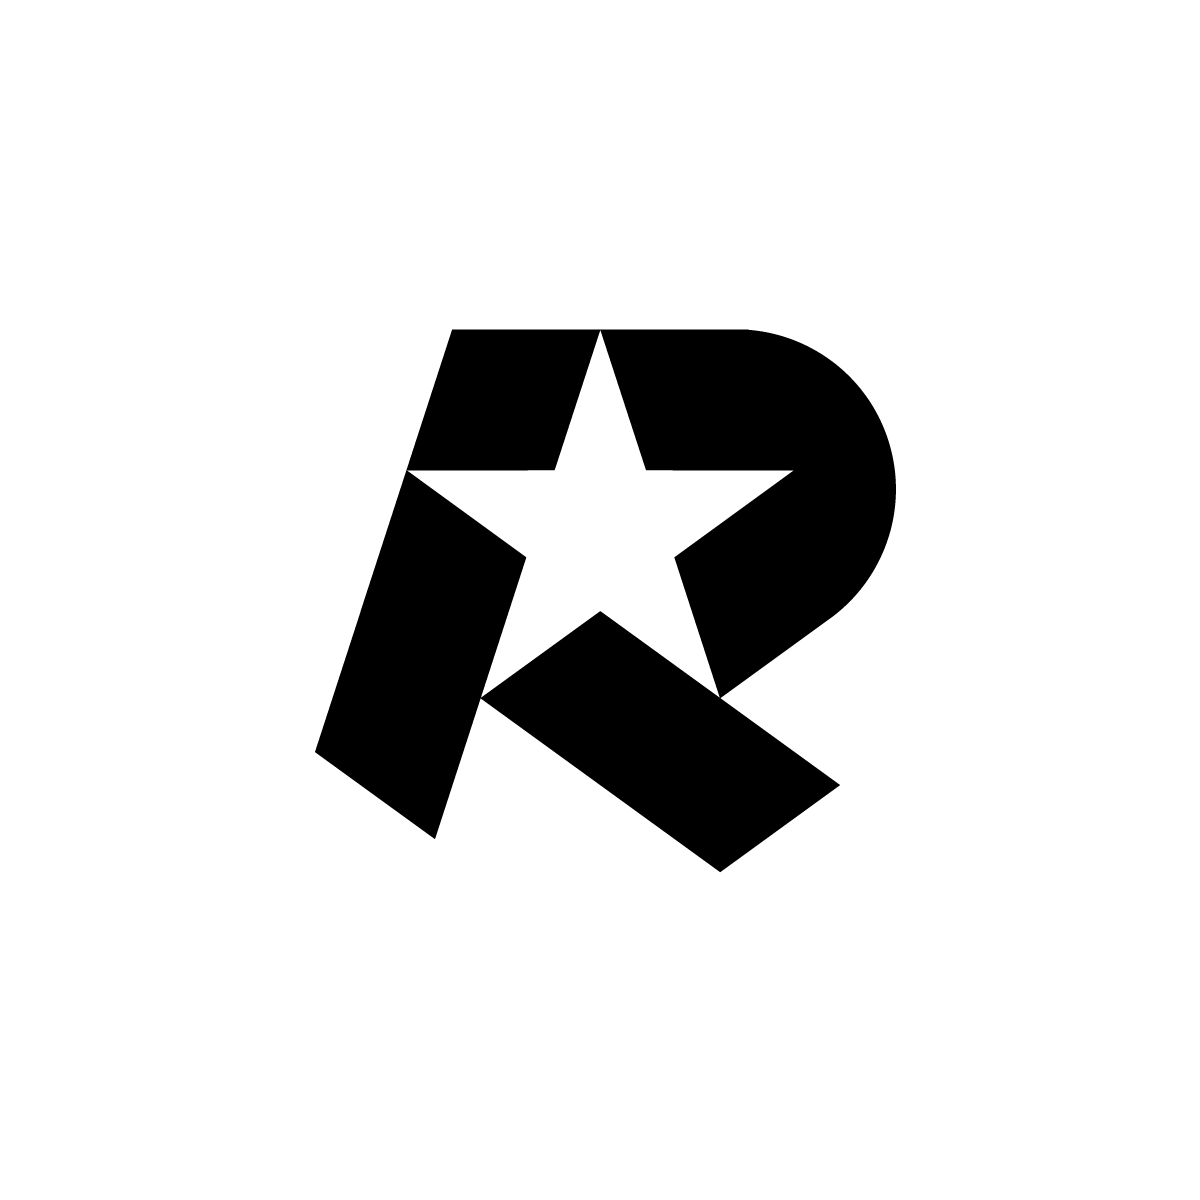 R Star Logo ingeniously integrates letter 'R' into a star shape, capturing growth, success, and timelessness, inspiring greatness.